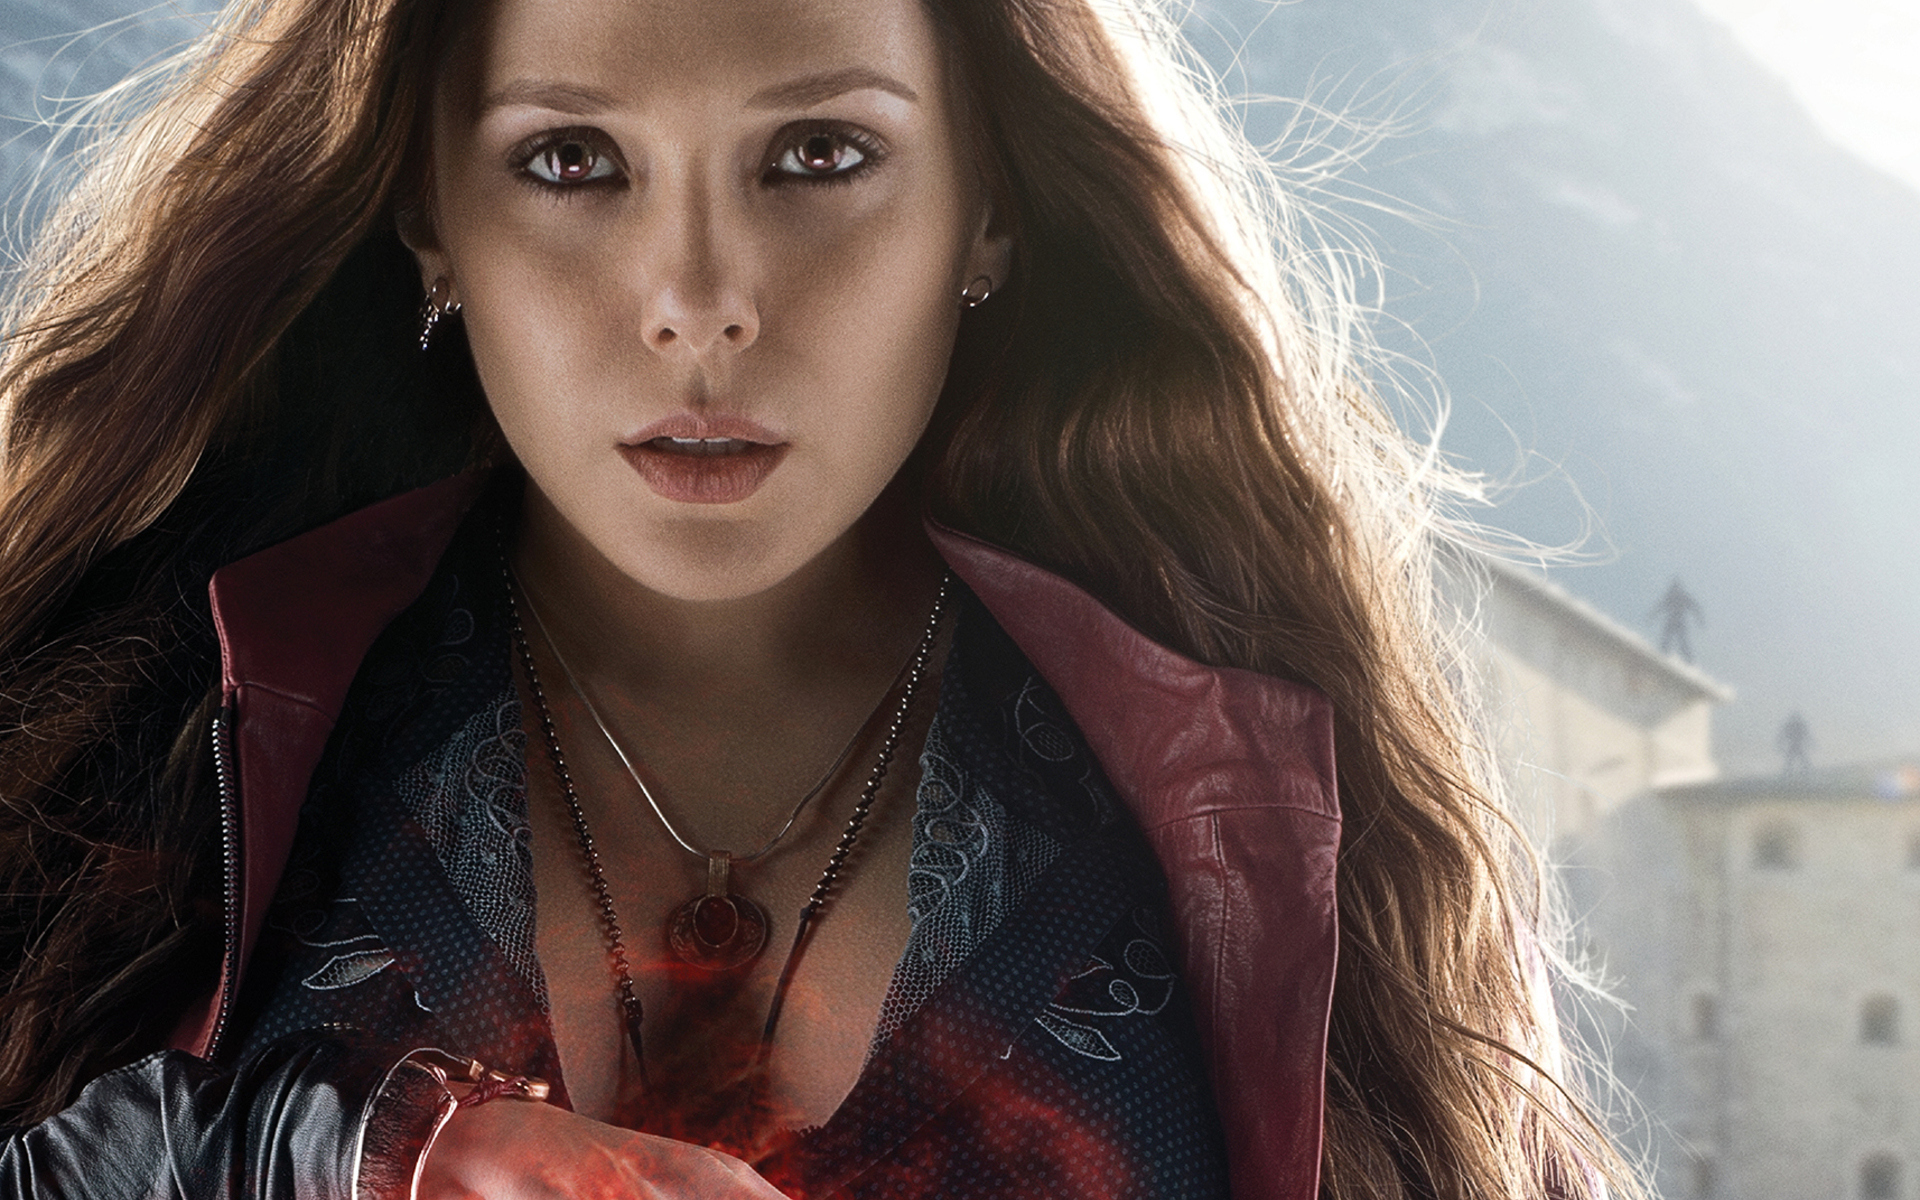 magic, avengers, scarlet witch, earrings, elizabeth olsen, long hair, movie, avengers: age of ultron, necklace, red eyes, redhead, the avengers mobile wallpaper